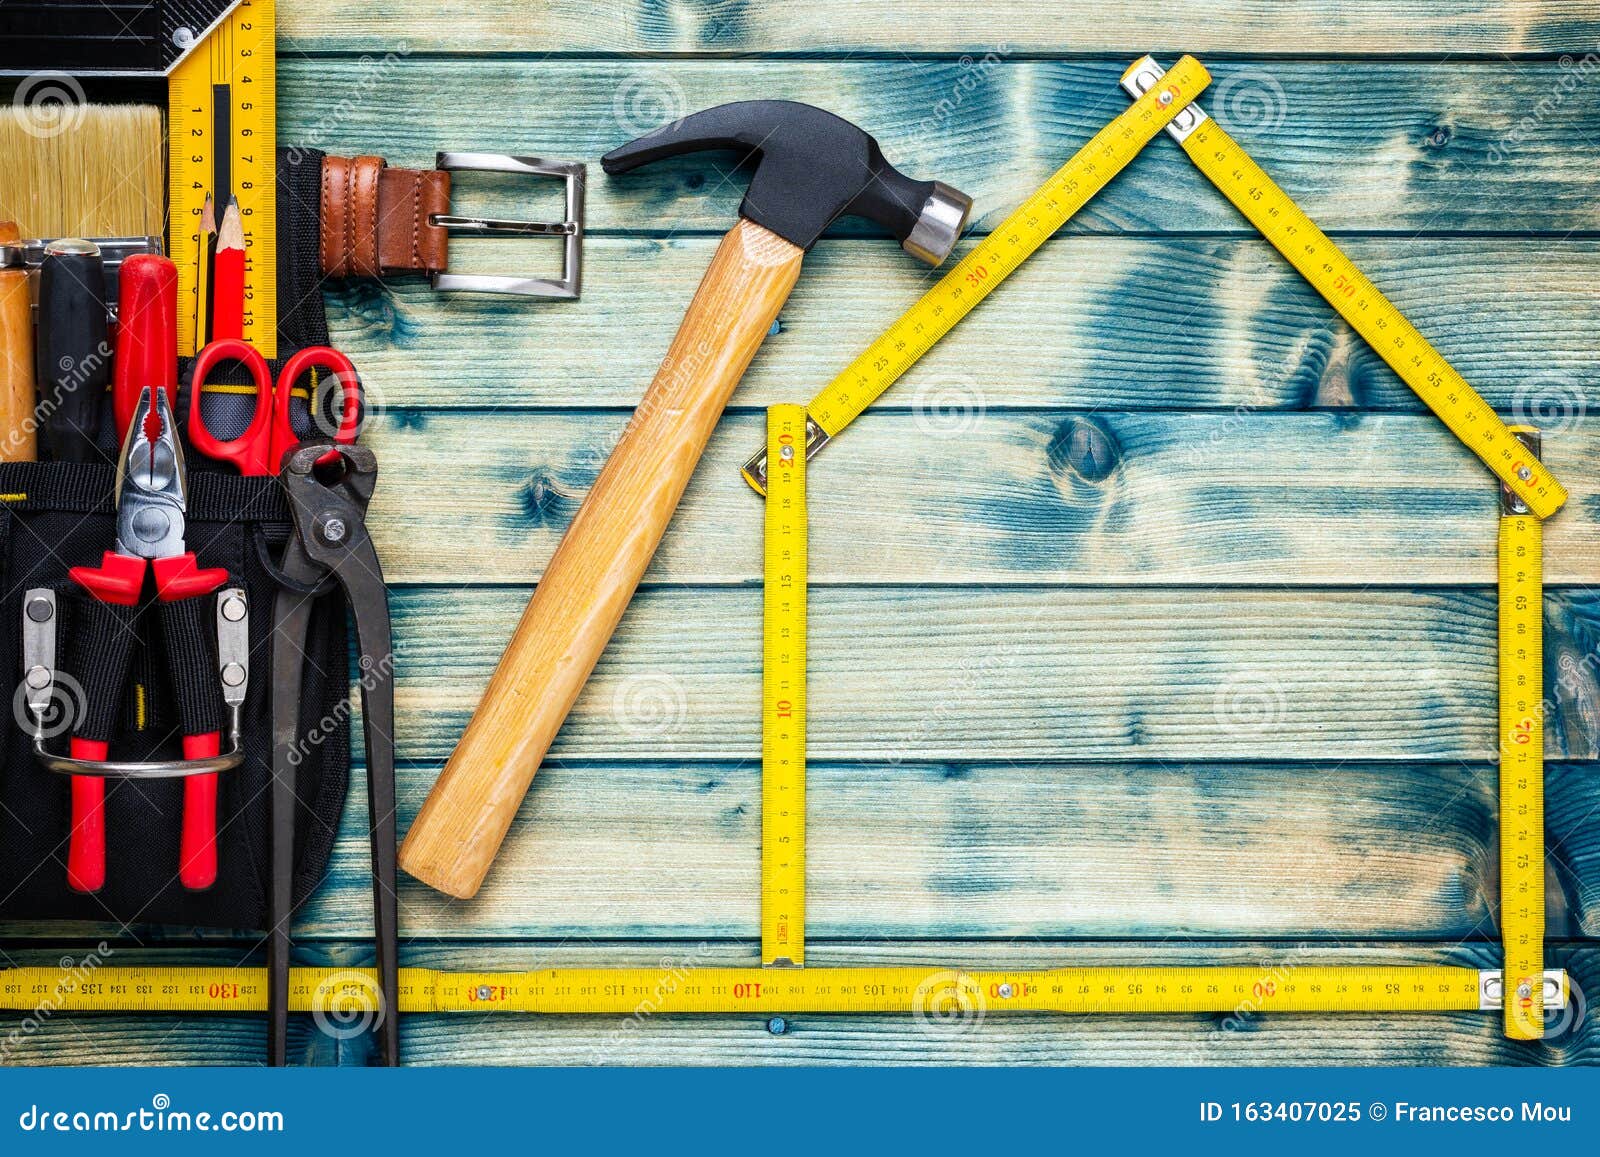 Carpenter S Work Tools On Wooden Background Carpentry Stock Image Image Of Protective Object 163407025